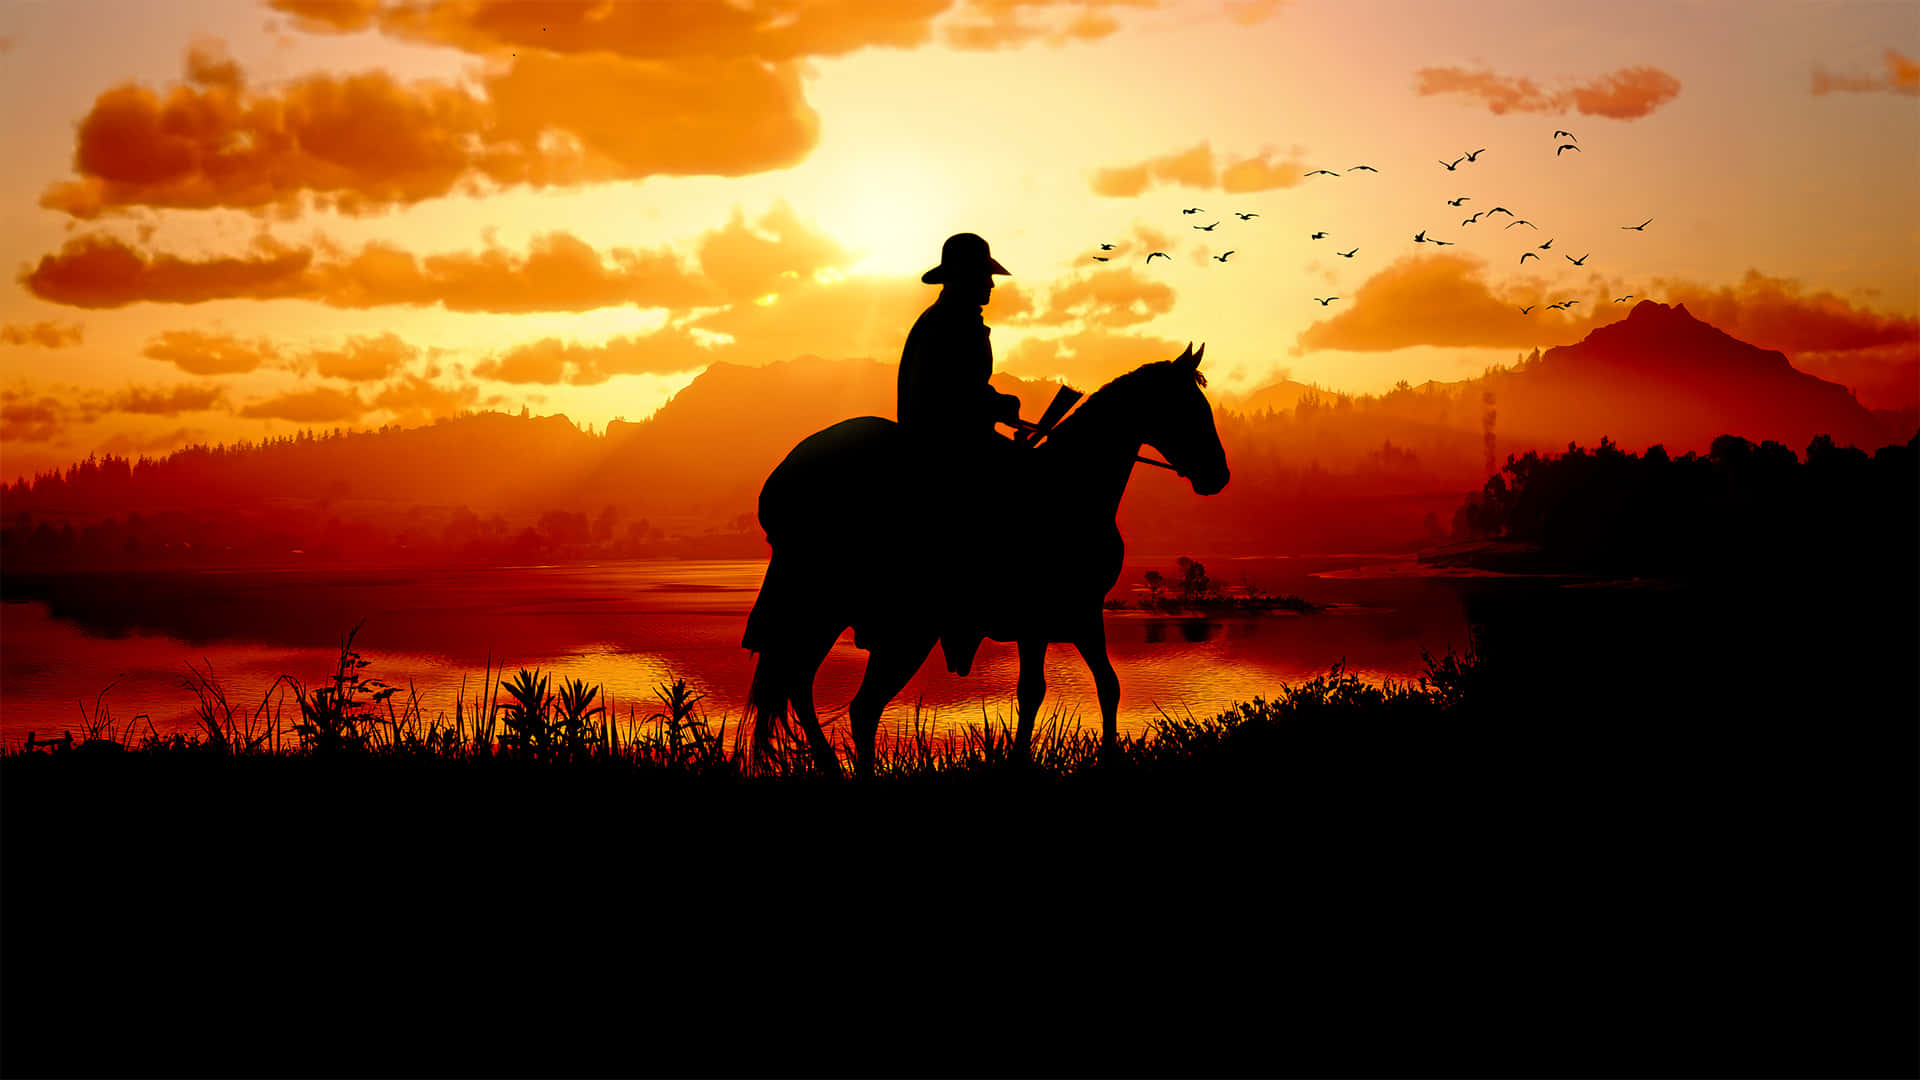 Best Red Dead Redemption 2 Shadow Of A Cowboy Sunset Background